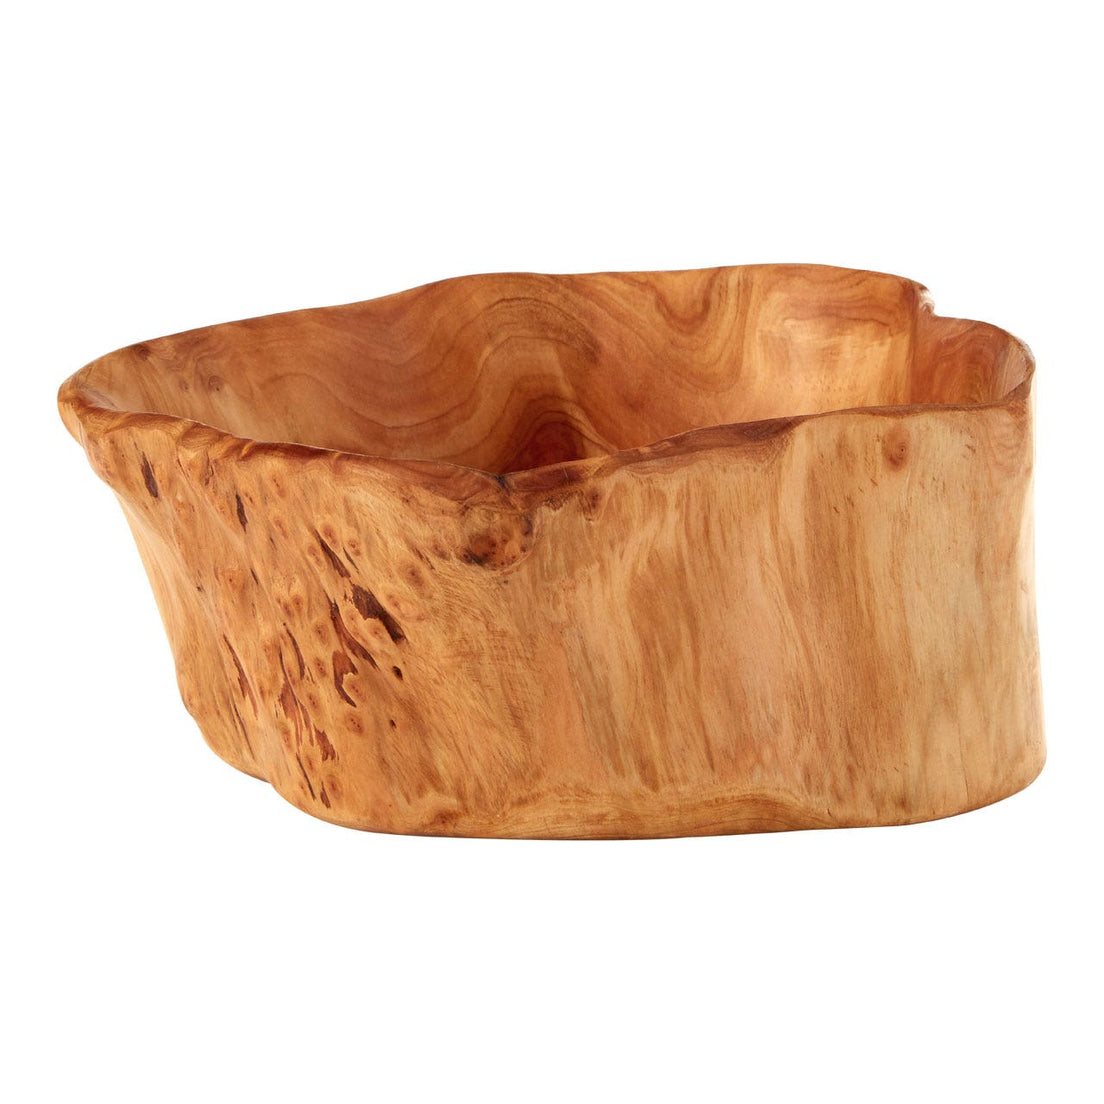 Handcrafted live wood bowl ideal for creating eye-catching centrepieces